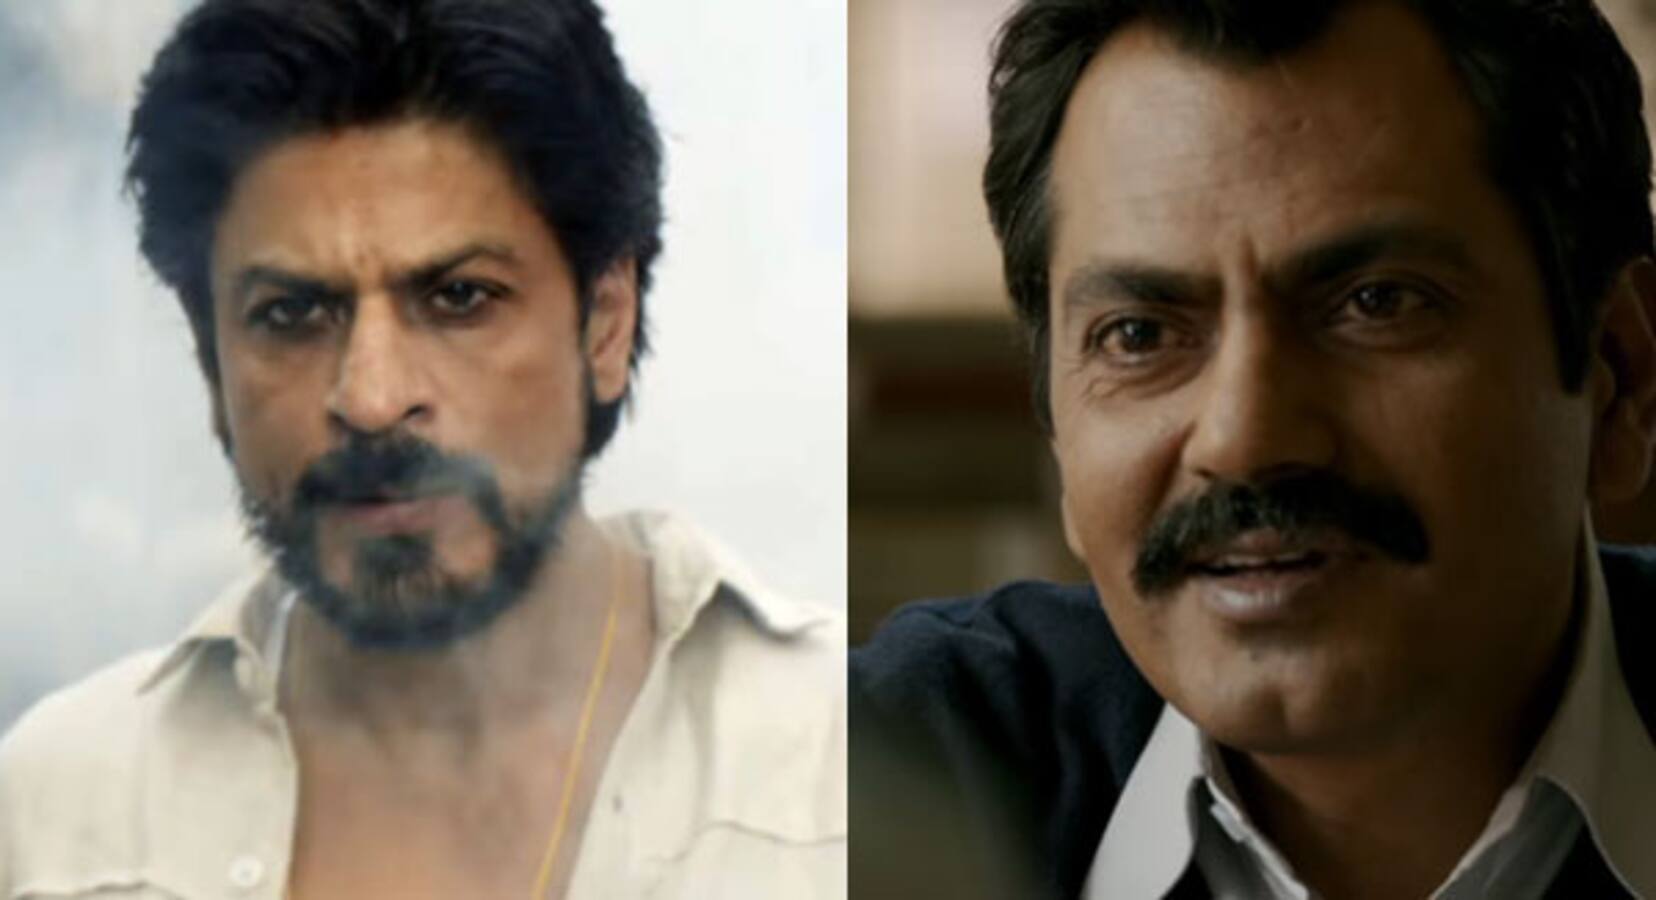 After losing out to Salman in Kick, will Nawazuddin manage to beat Shah Rukh in Raees?